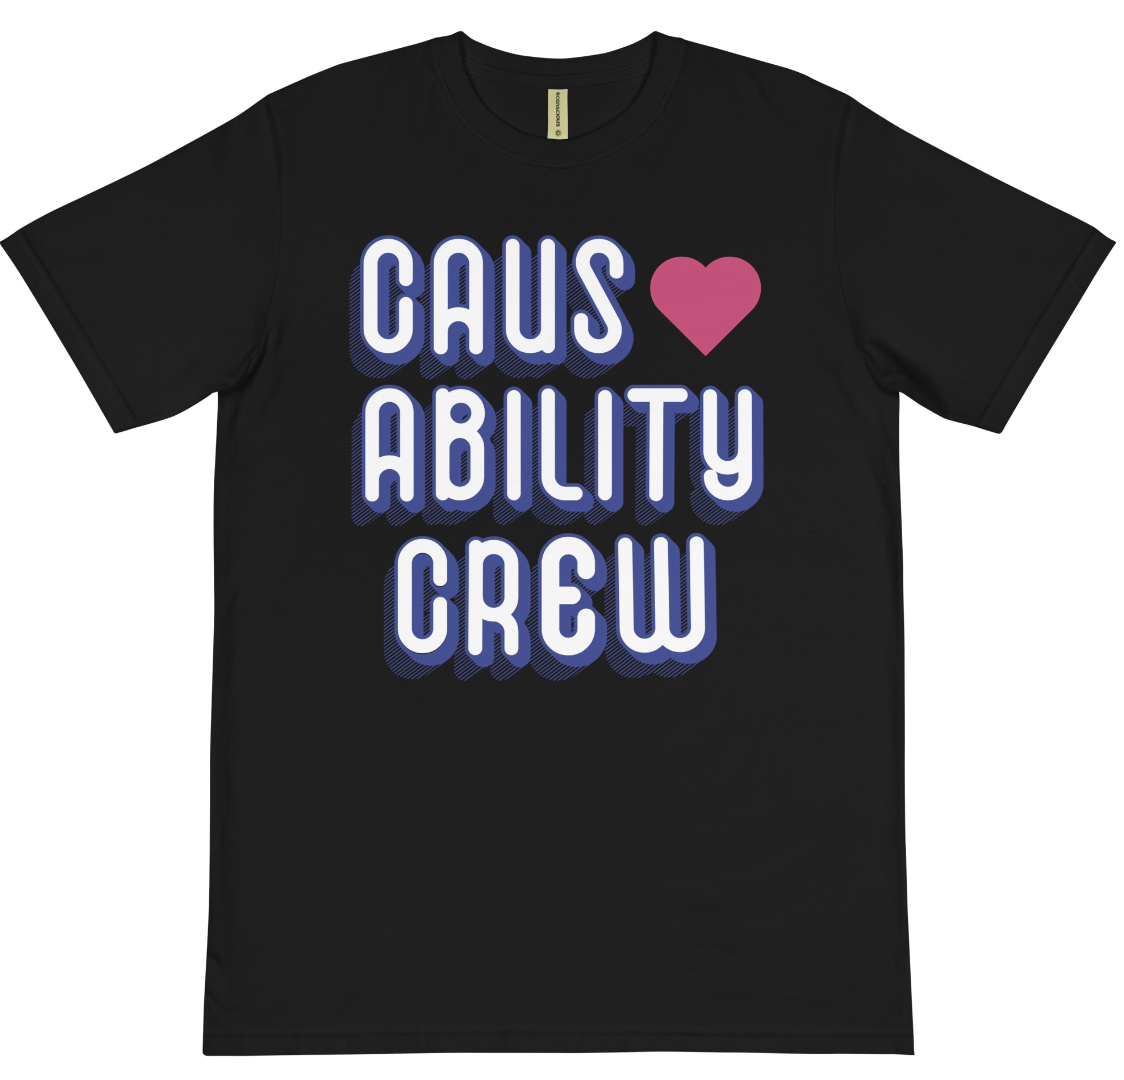 Causability Gives Back!